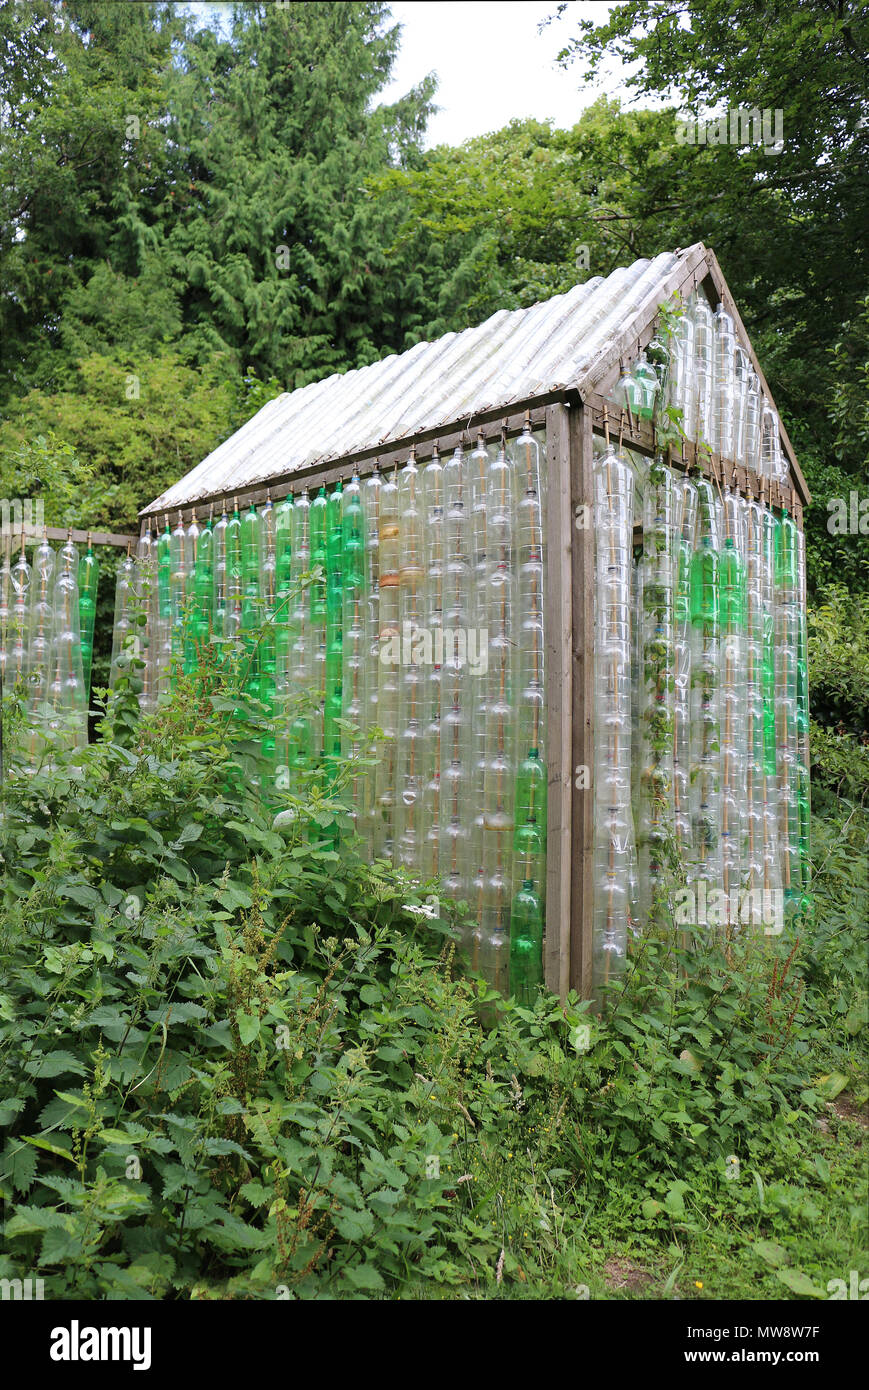 Greenhouse made of old plastic bottles Stock Photo